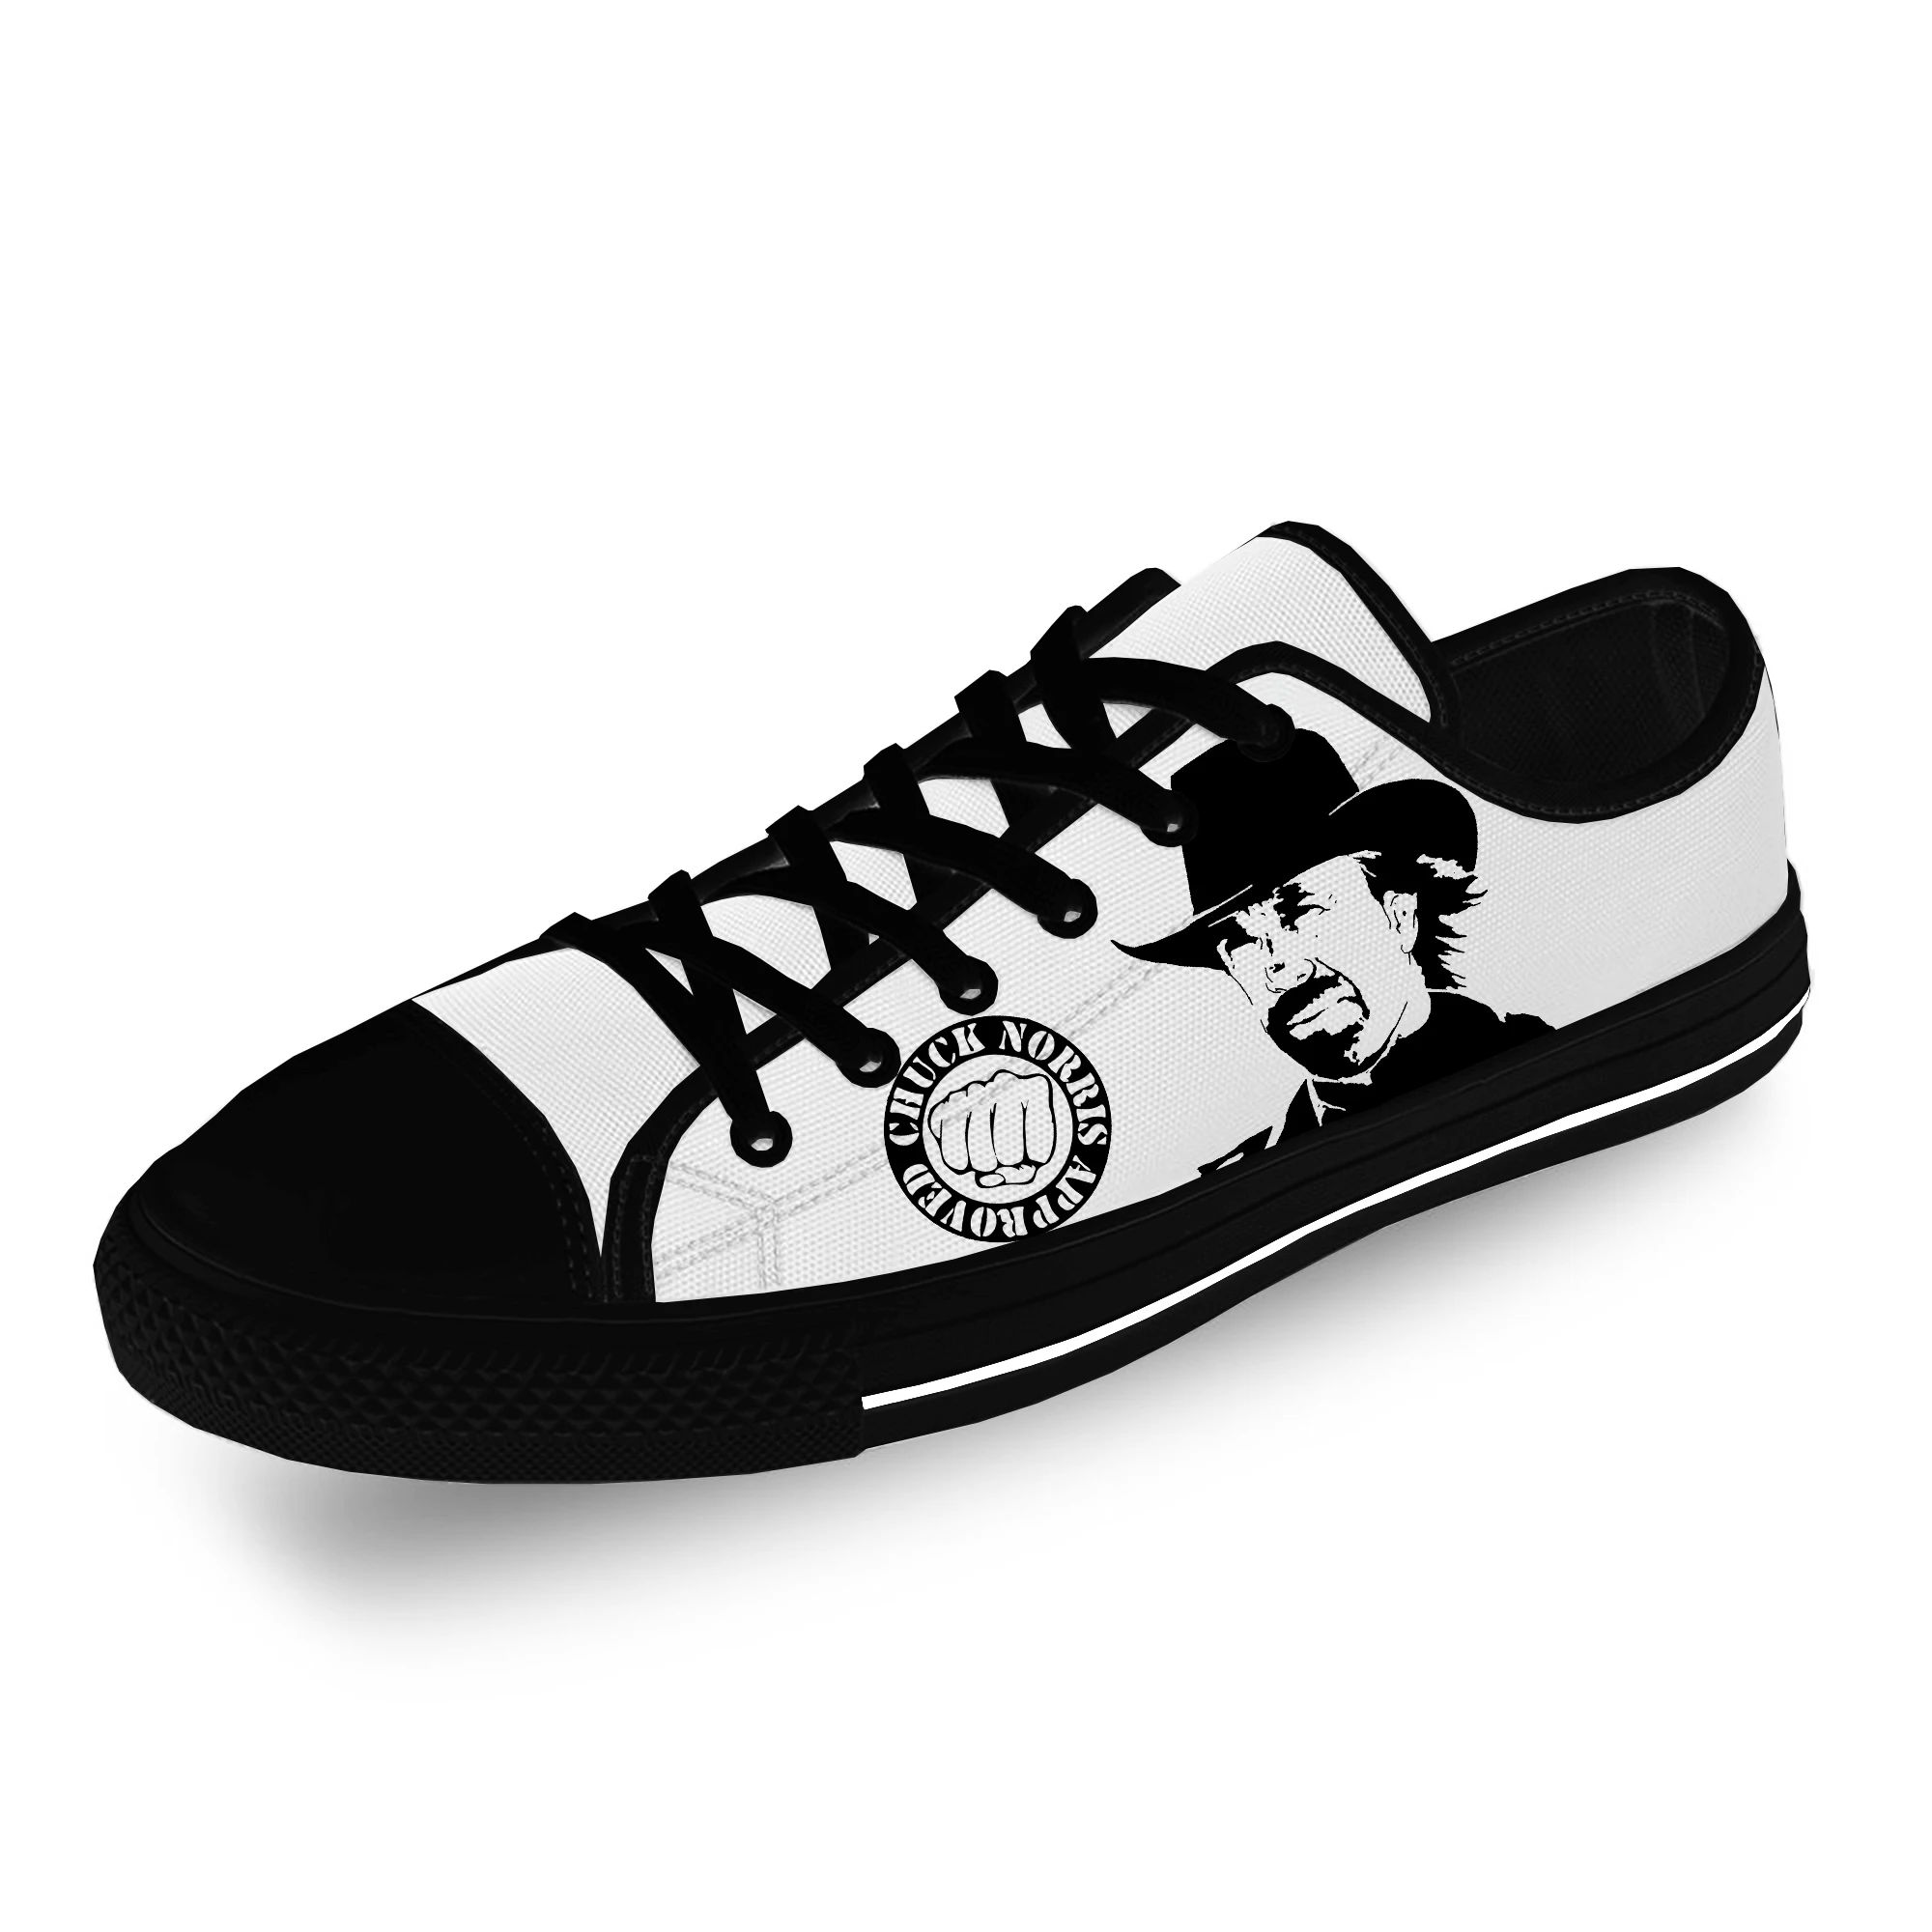 

Chuck Norris Low Top Sneakers Mens Womens Teenager Casual Shoes Canvas Black Shoes 3D Printed Breathable Lightweight Shoe